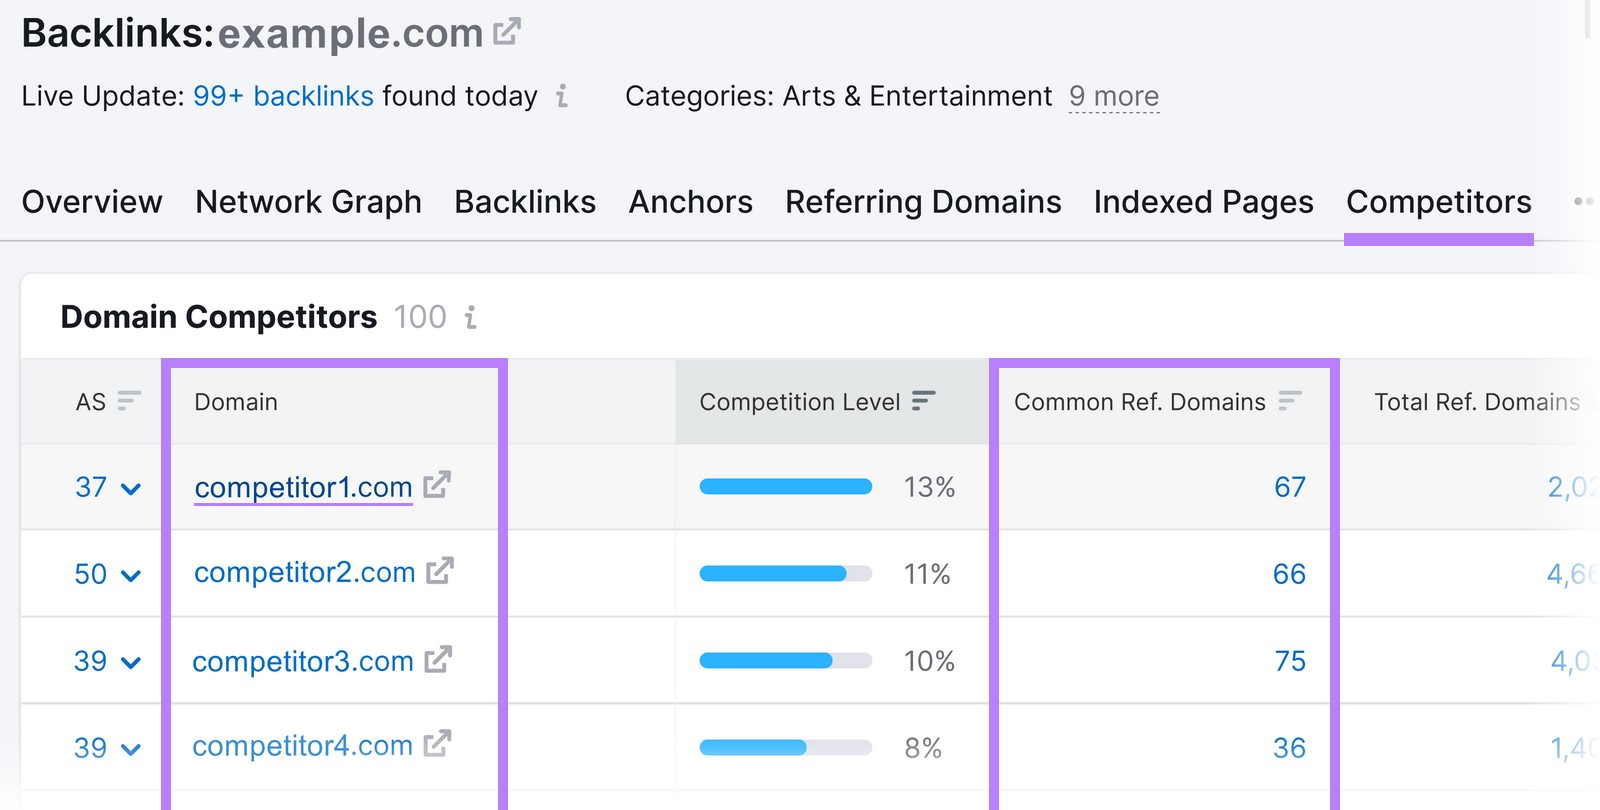 Backlink Analytics tool shows a list of competitors and links to their referring domains